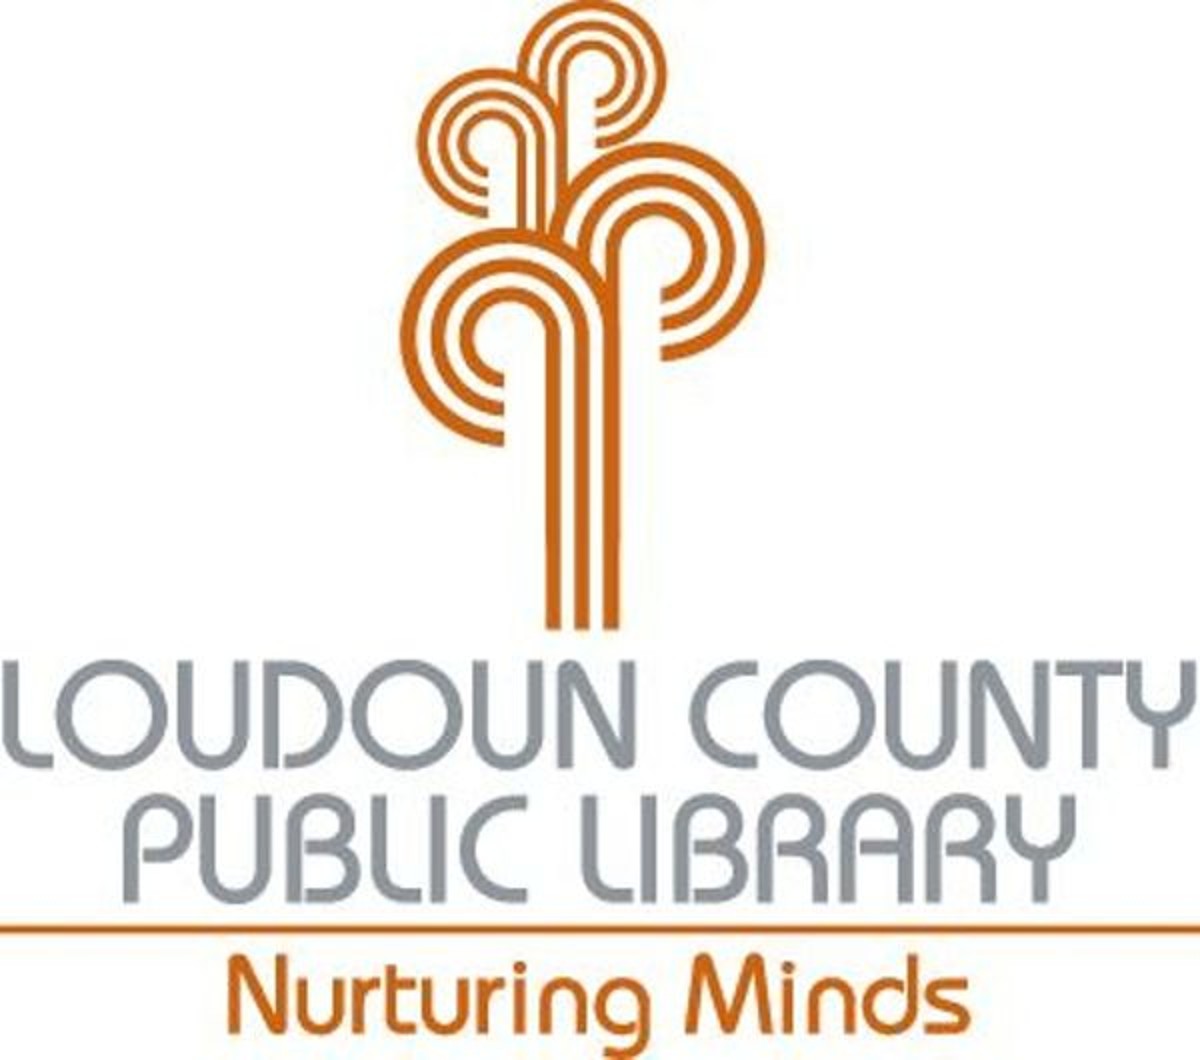 Loudoun County Public Libraries are partnering with the Loudoun Arts Council to offer artists' residencies